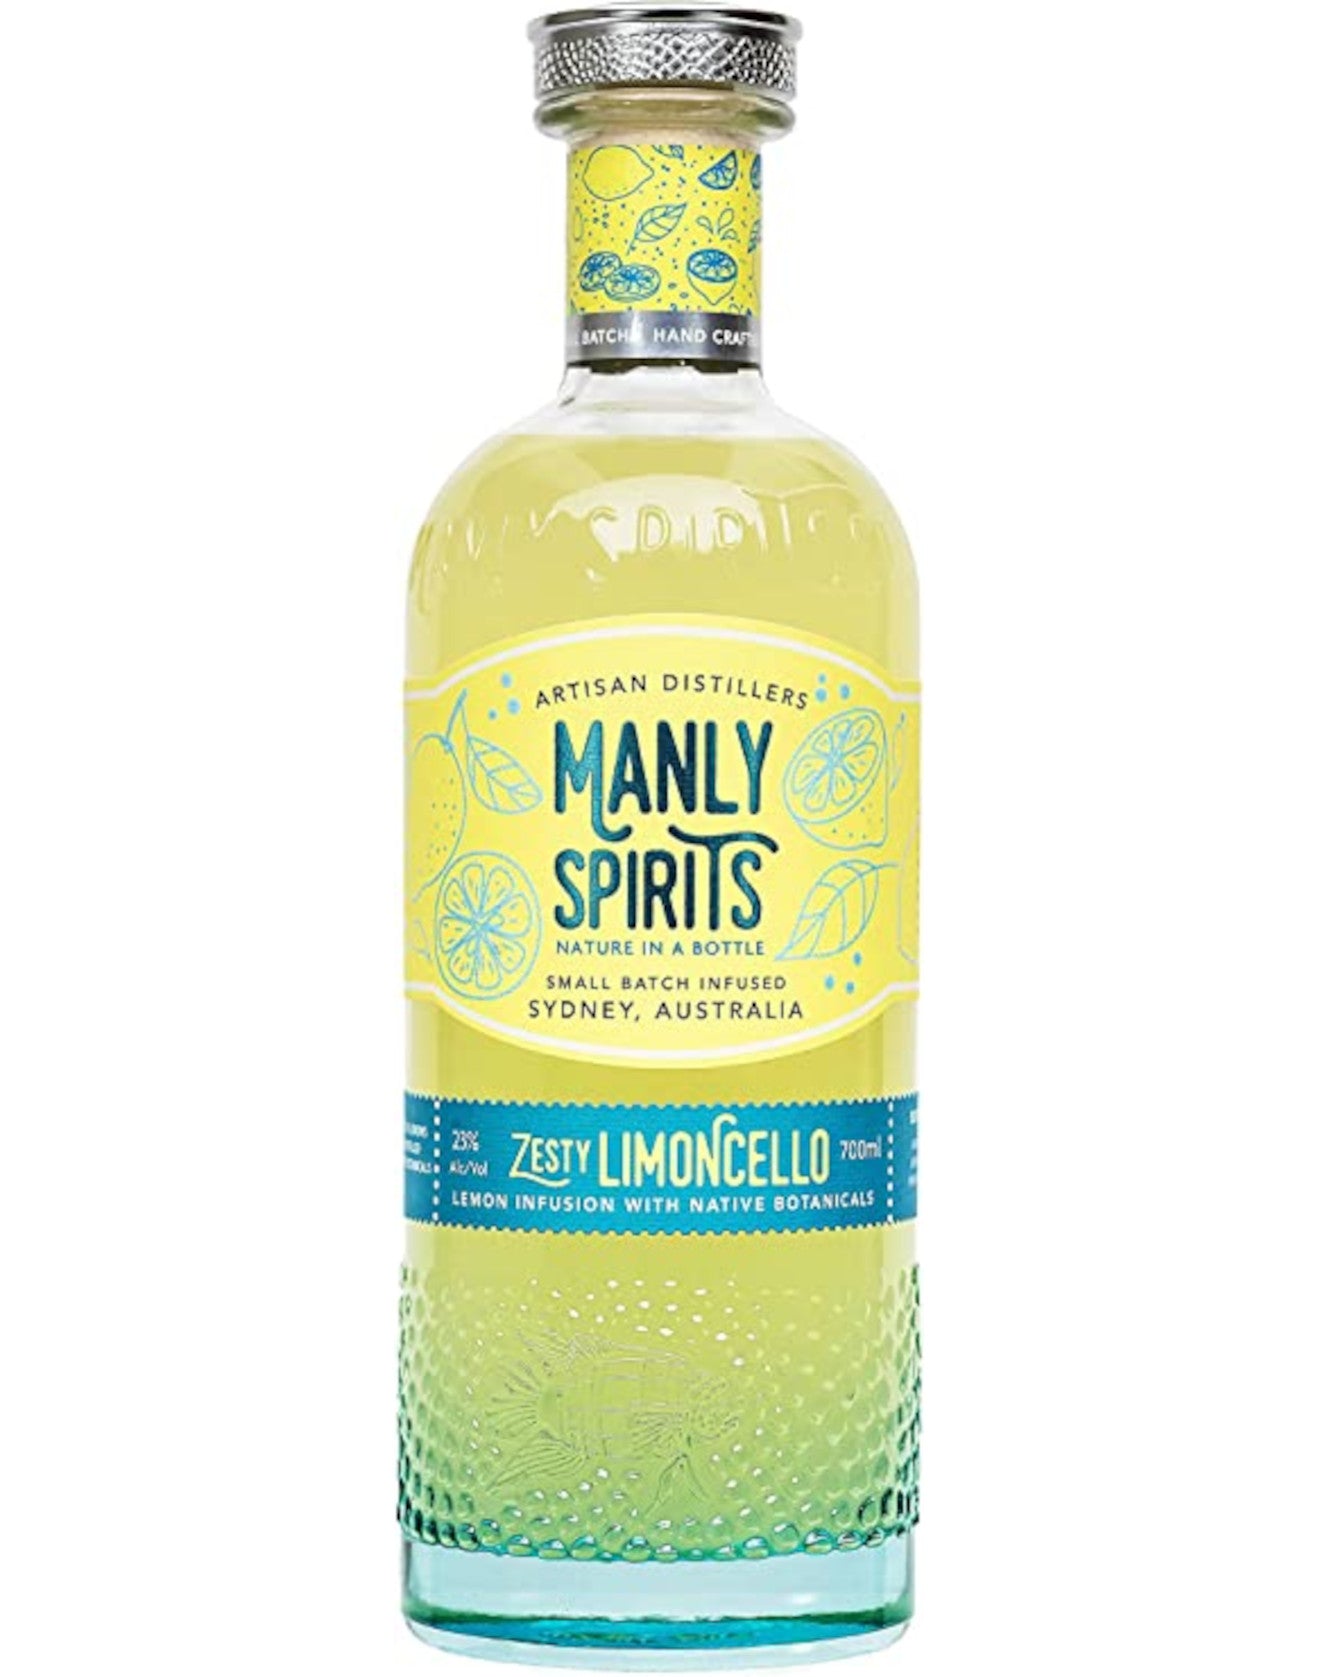 Zesty Limoncello, Manly Spirits 70cl